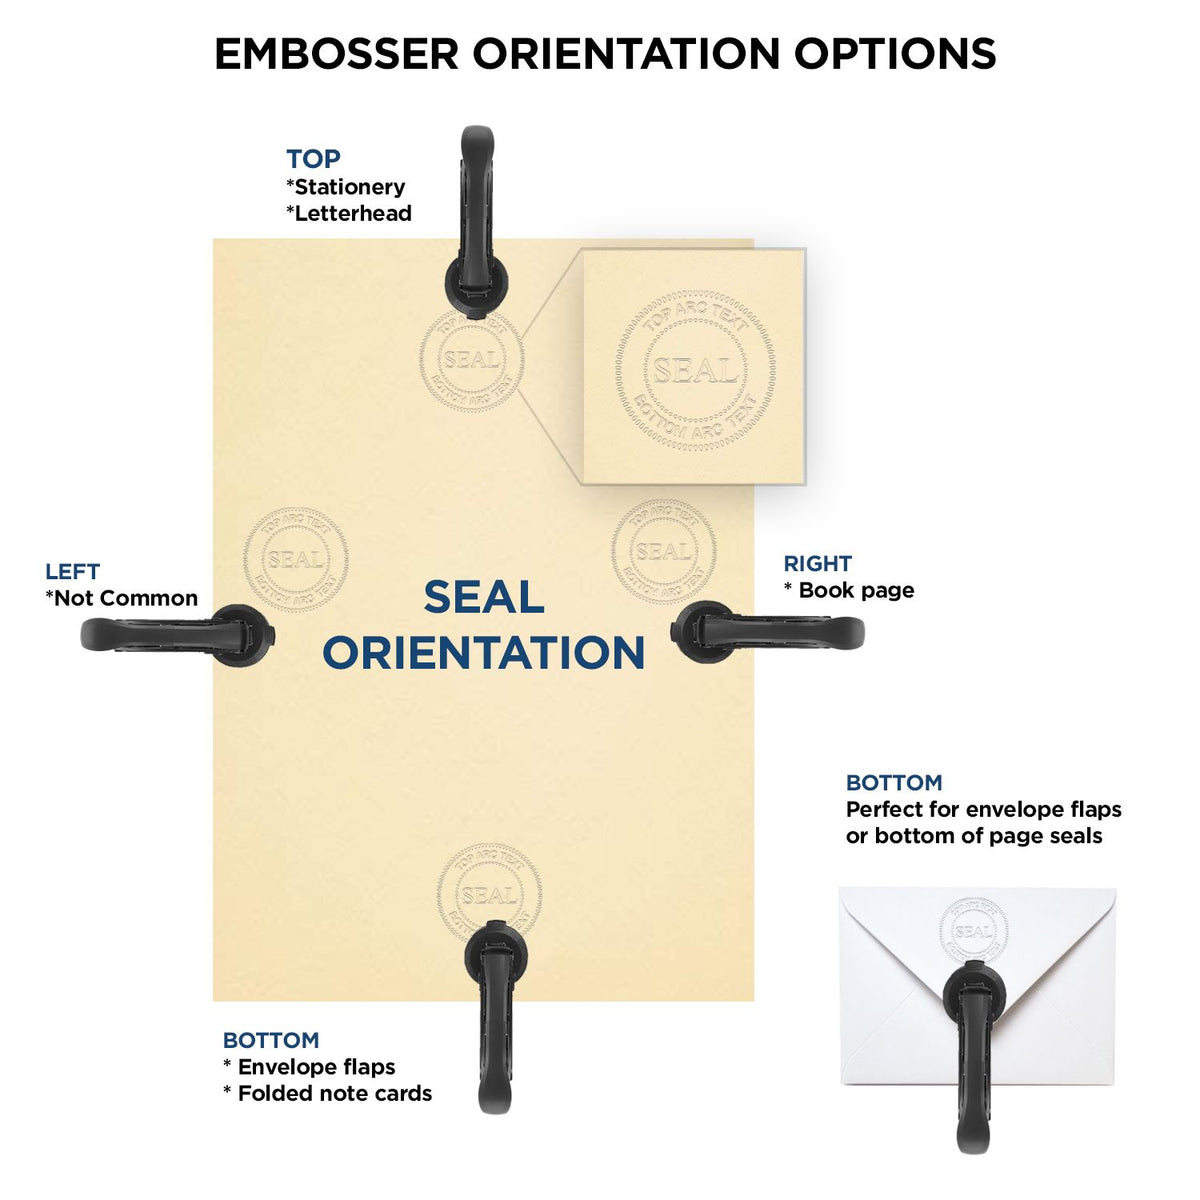 An infographic for the Long Reach Arizona Land Surveyor Seal showing embosser orientation, this is showing examples of a top, bottom, right and left insert.